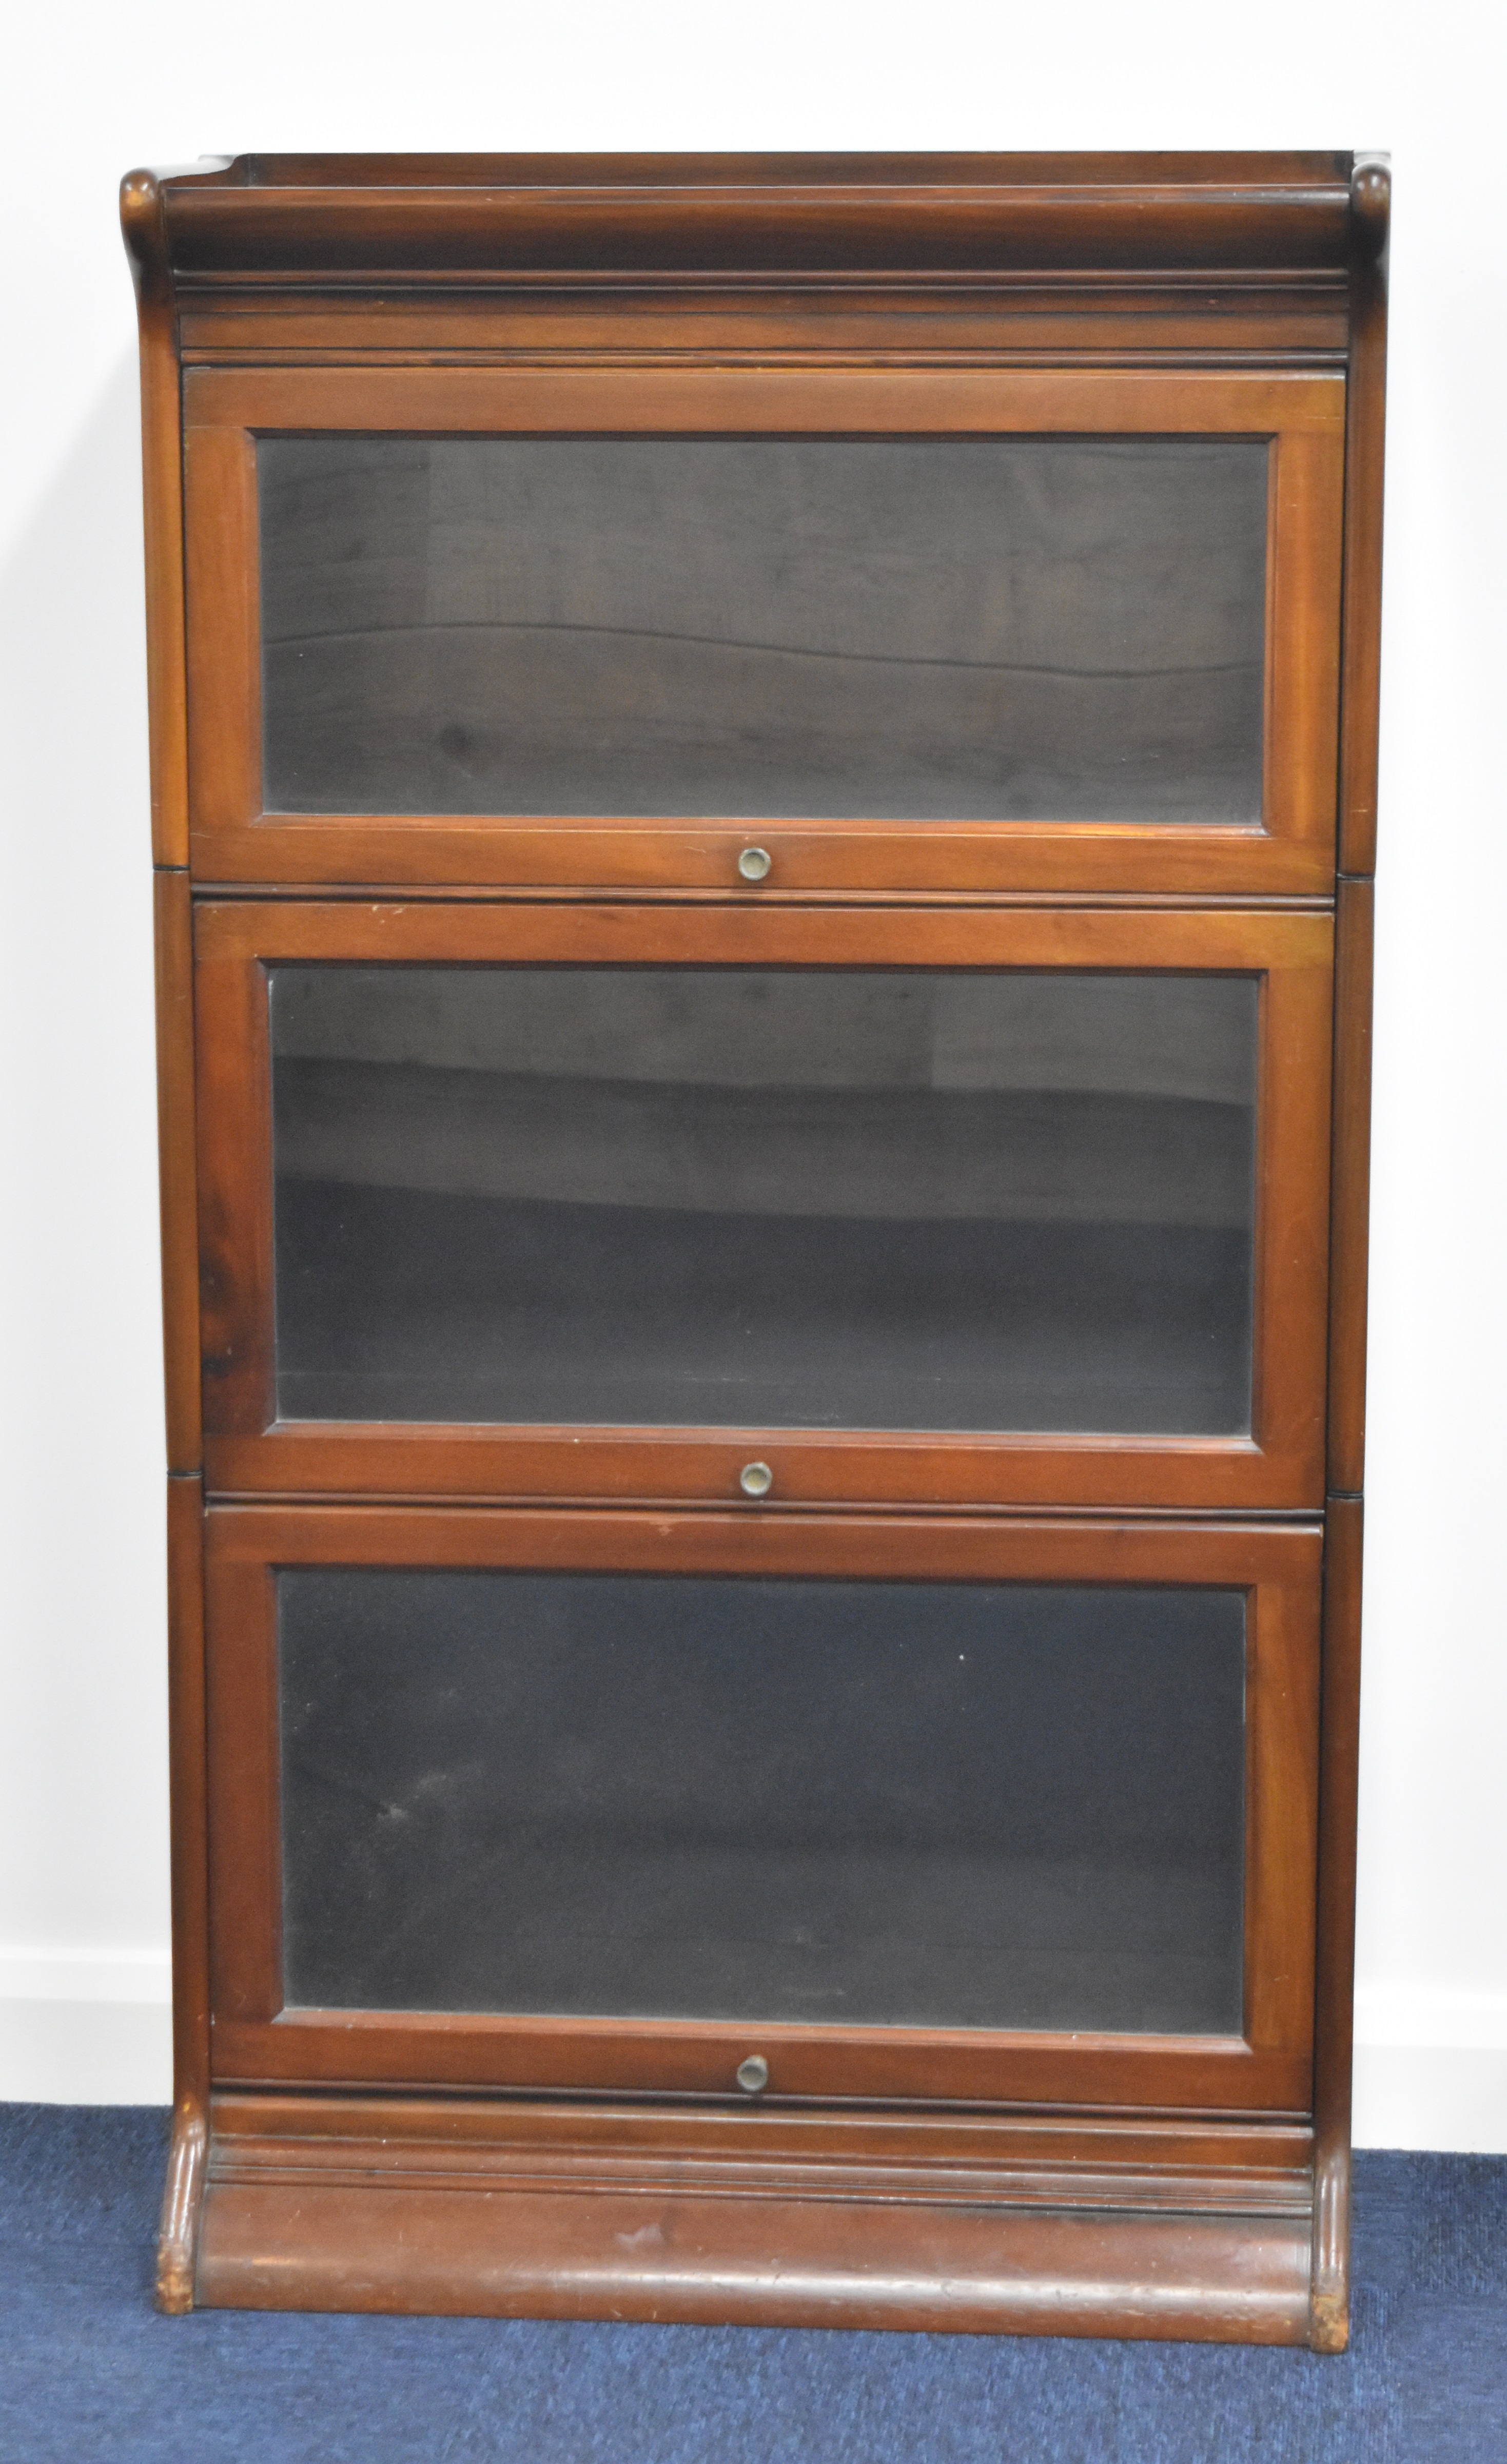 Gumm Globe Wernicke style three section stacking bookcase with glazed up and over doors, W66 x D31 x